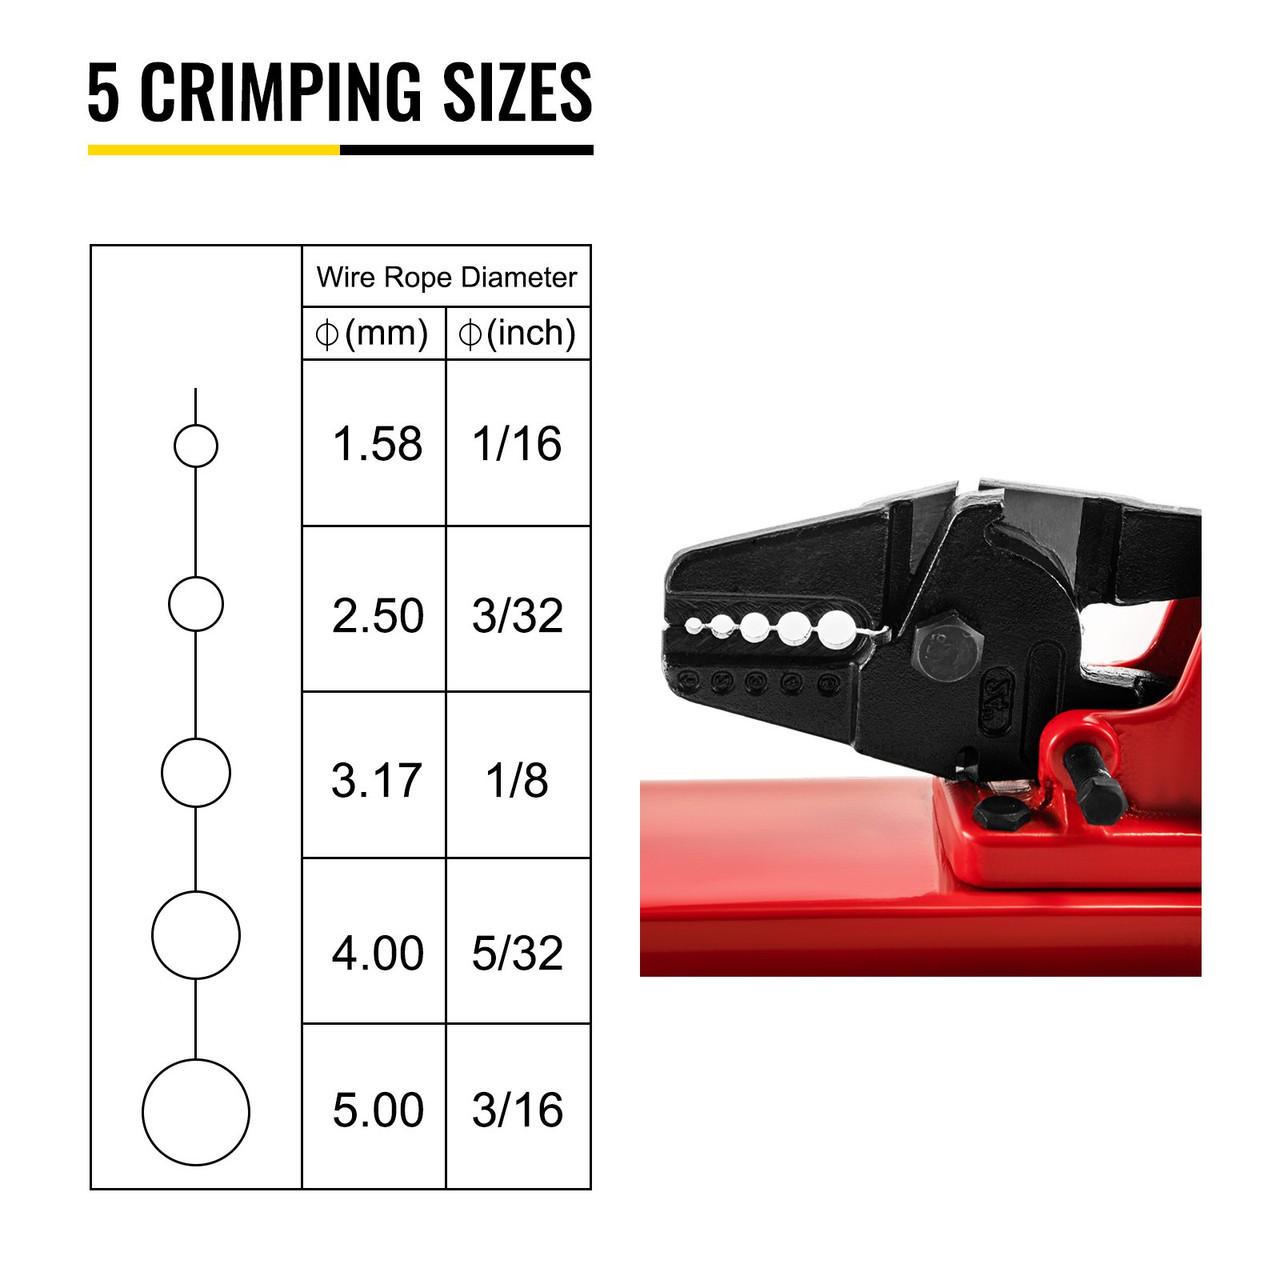 Bench Type Hand Swager, 24" Bench Type Swaging Tool, Bench Type Crimper for 1/16" 3/32" 1/8" 5/32" 3/16", CRV (HRC 35-45 Degree) Bench Type Crimping Tool, Bench Swager Tool for Cable Wire Rope